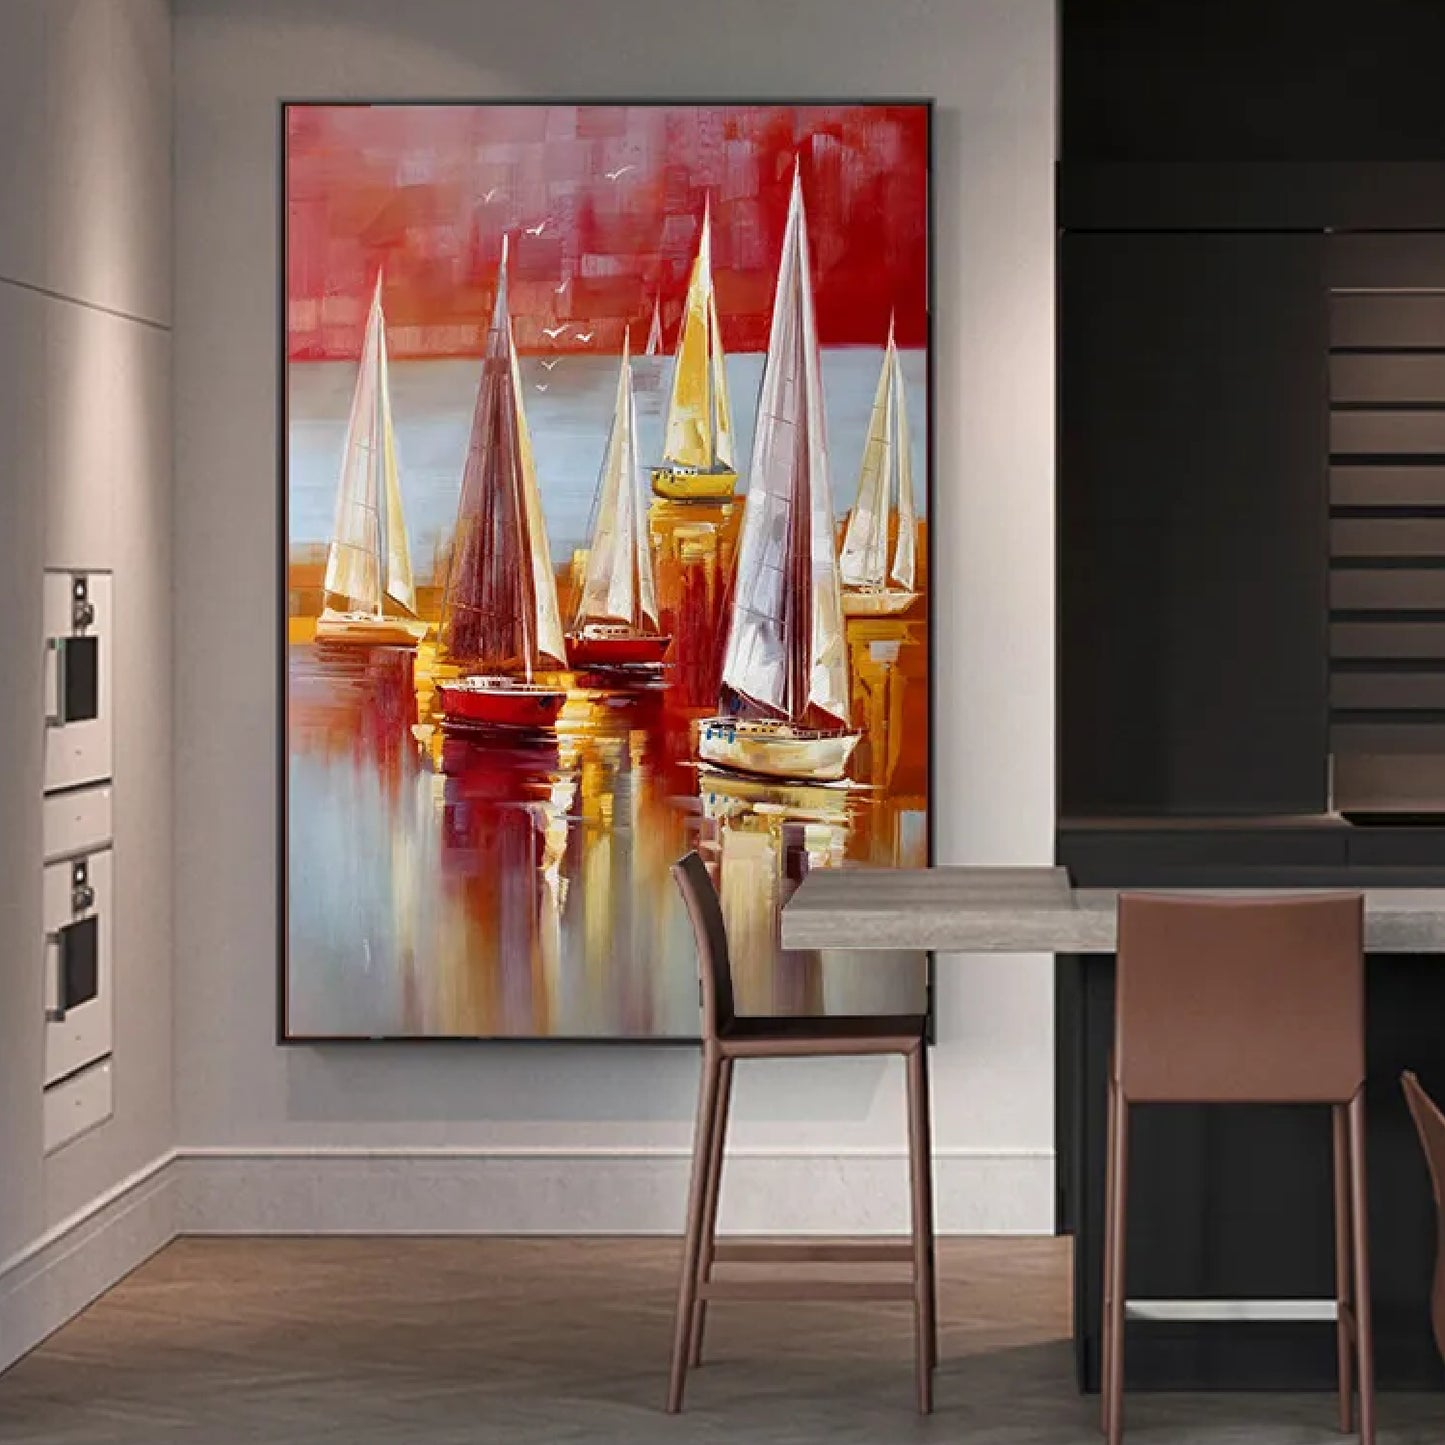 Continental Style Sea Boats Abstract Seascape Art